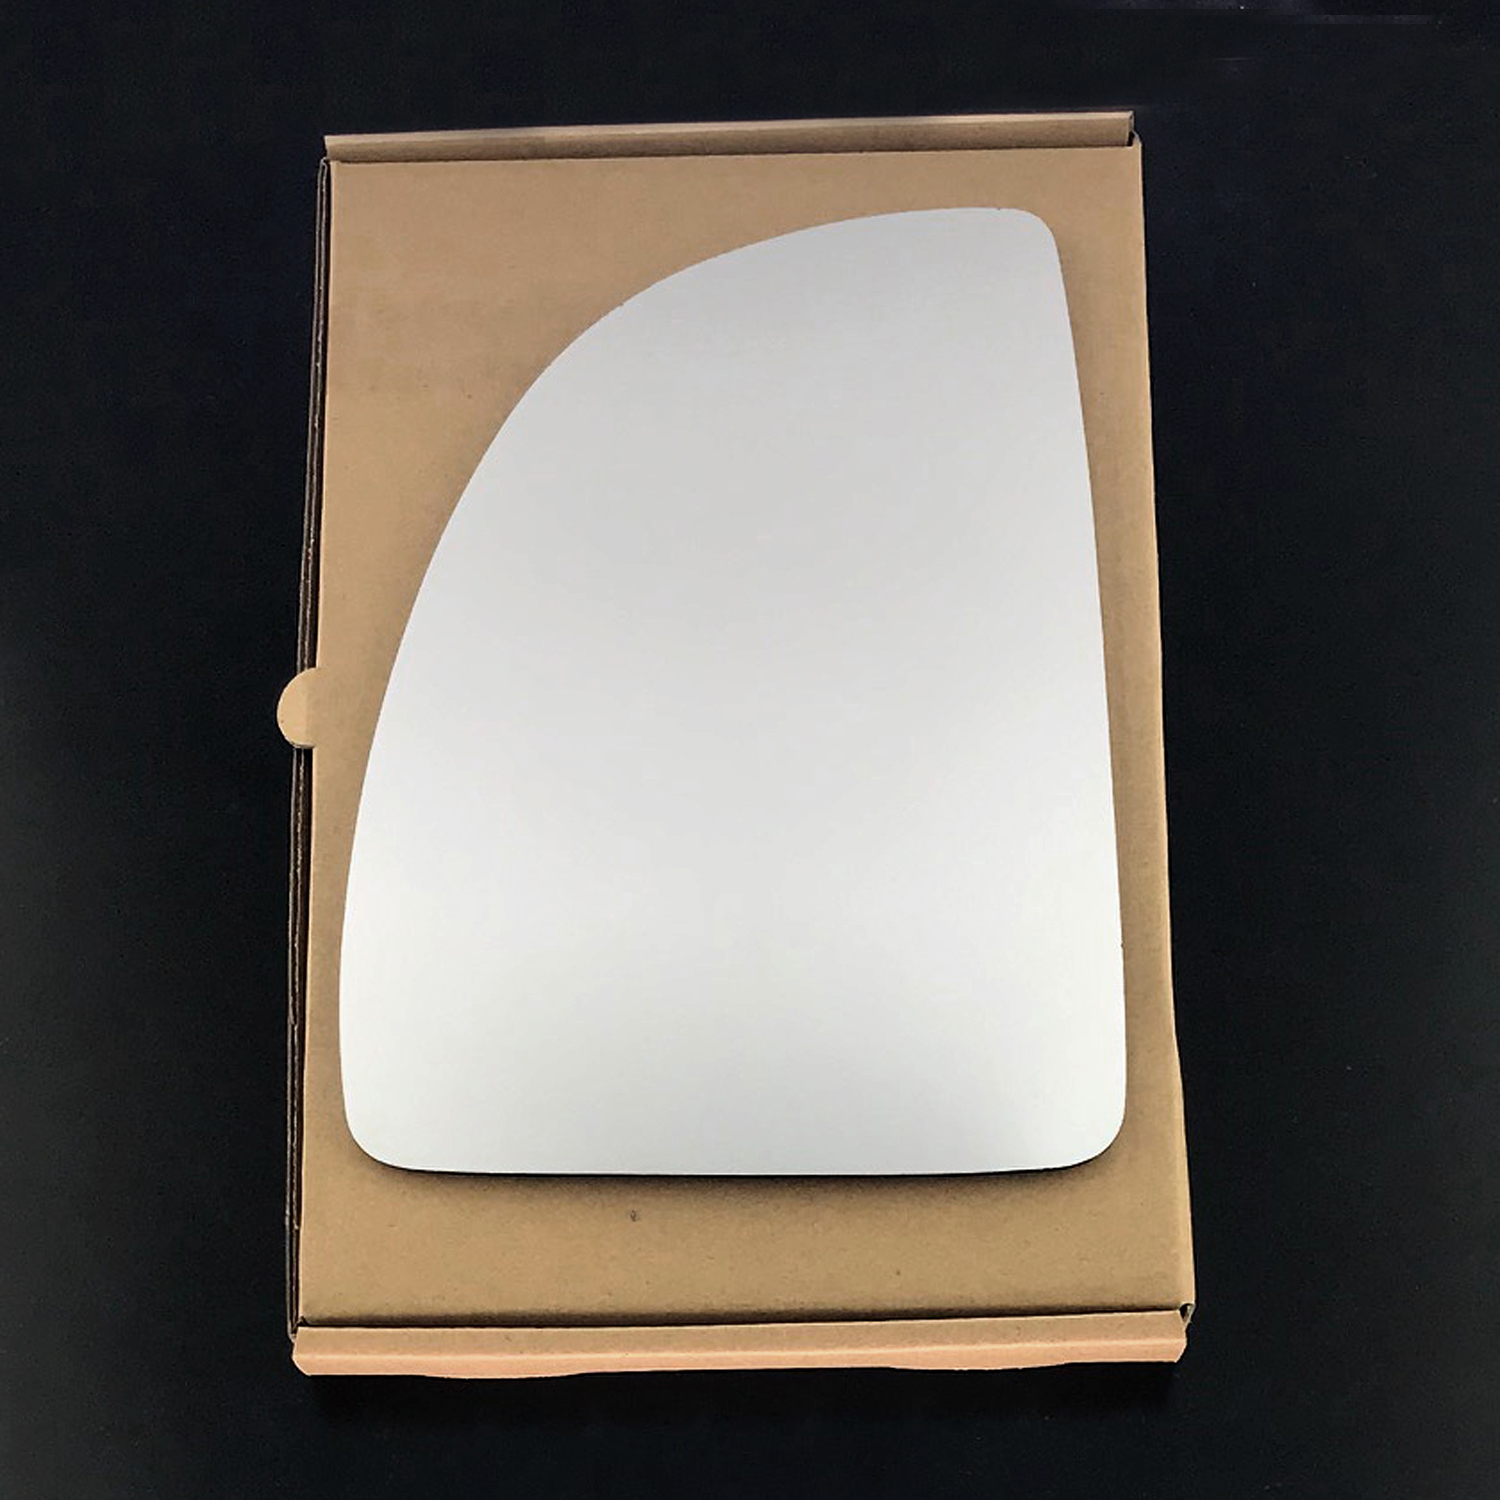 Citroen Relay Wing Mirror Glass LEFT HAND ( UK Passenger Side ) 1998 to 2006 – Convex Wing Mirror